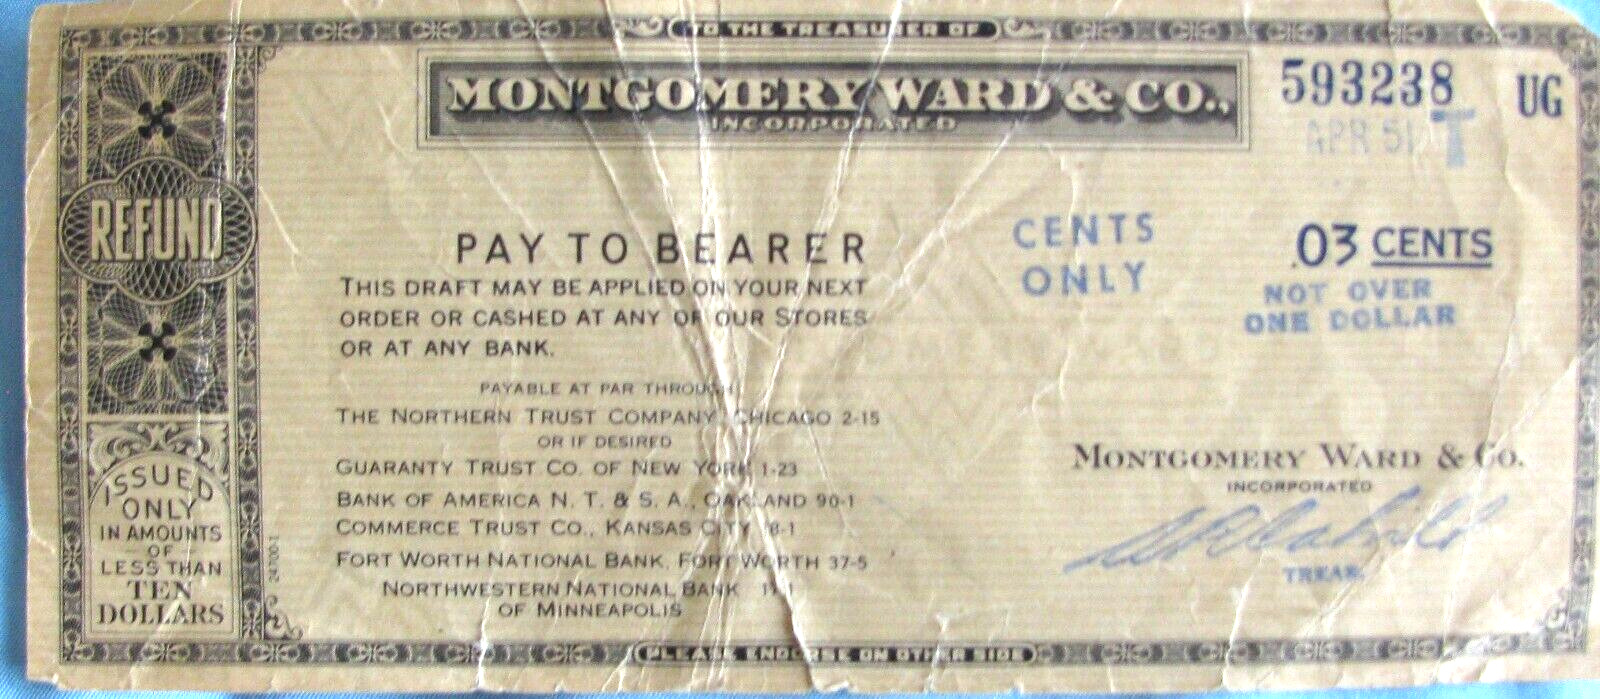 Montgomery Ward & Co Check - April 1951 - 3 Cents  - Circulated - NB100